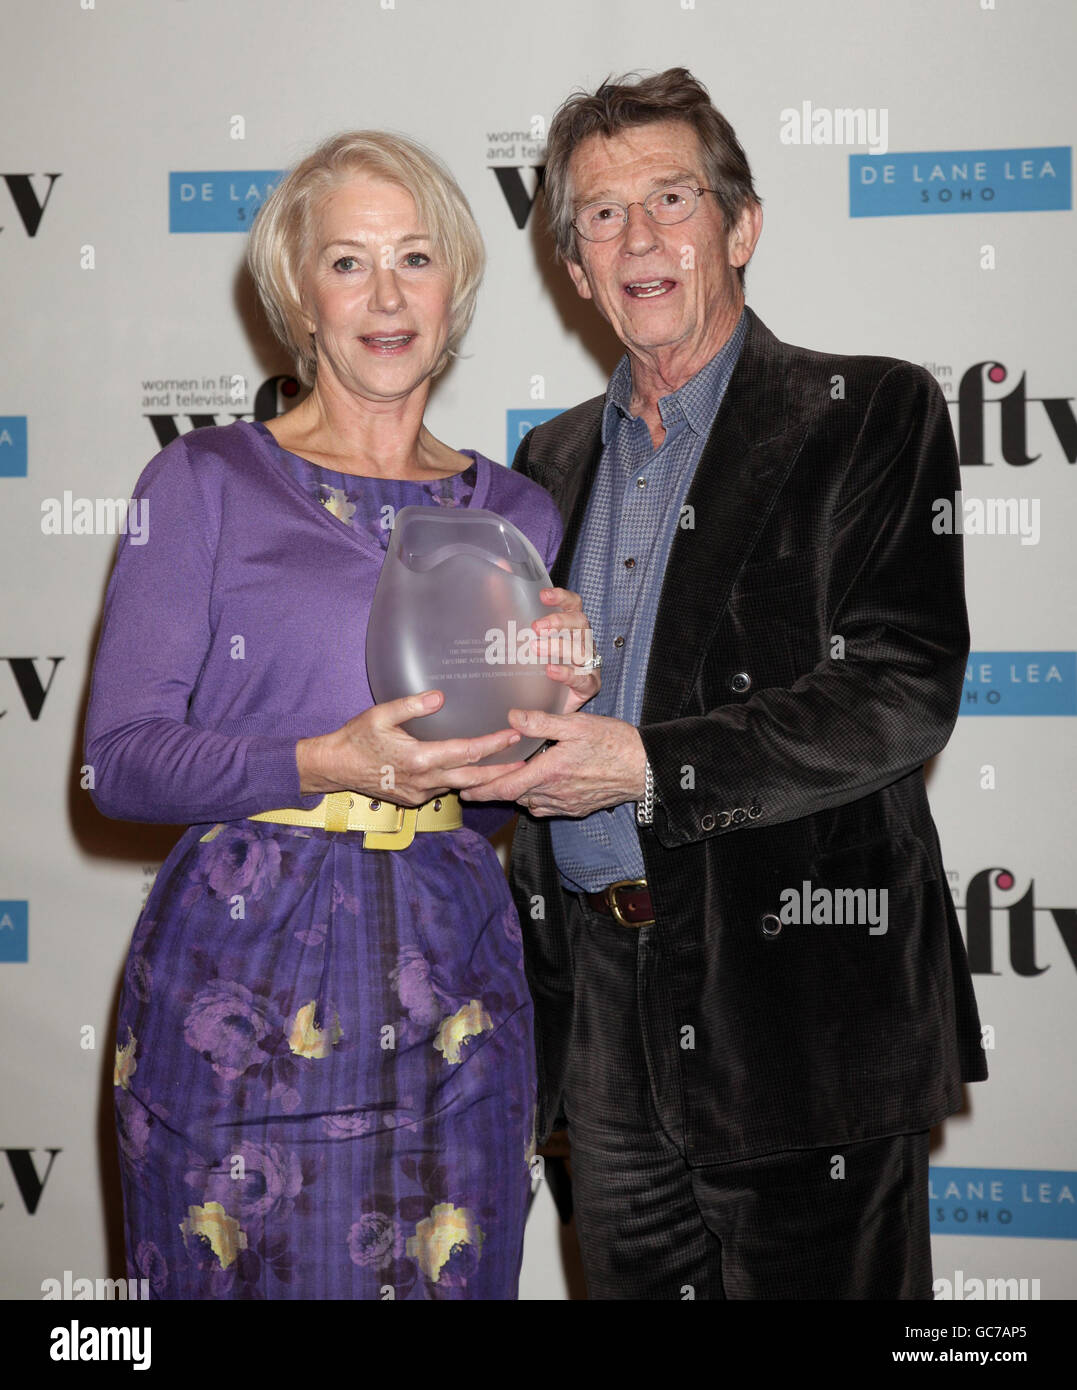 Dame Helen Mirren with the Working Title Films Lifetime Achievement Award, which was presented to her by John Hurt, at the Women in Film and Television Awards luncheon at the Park Lane Hilton, central London. Stock Photo